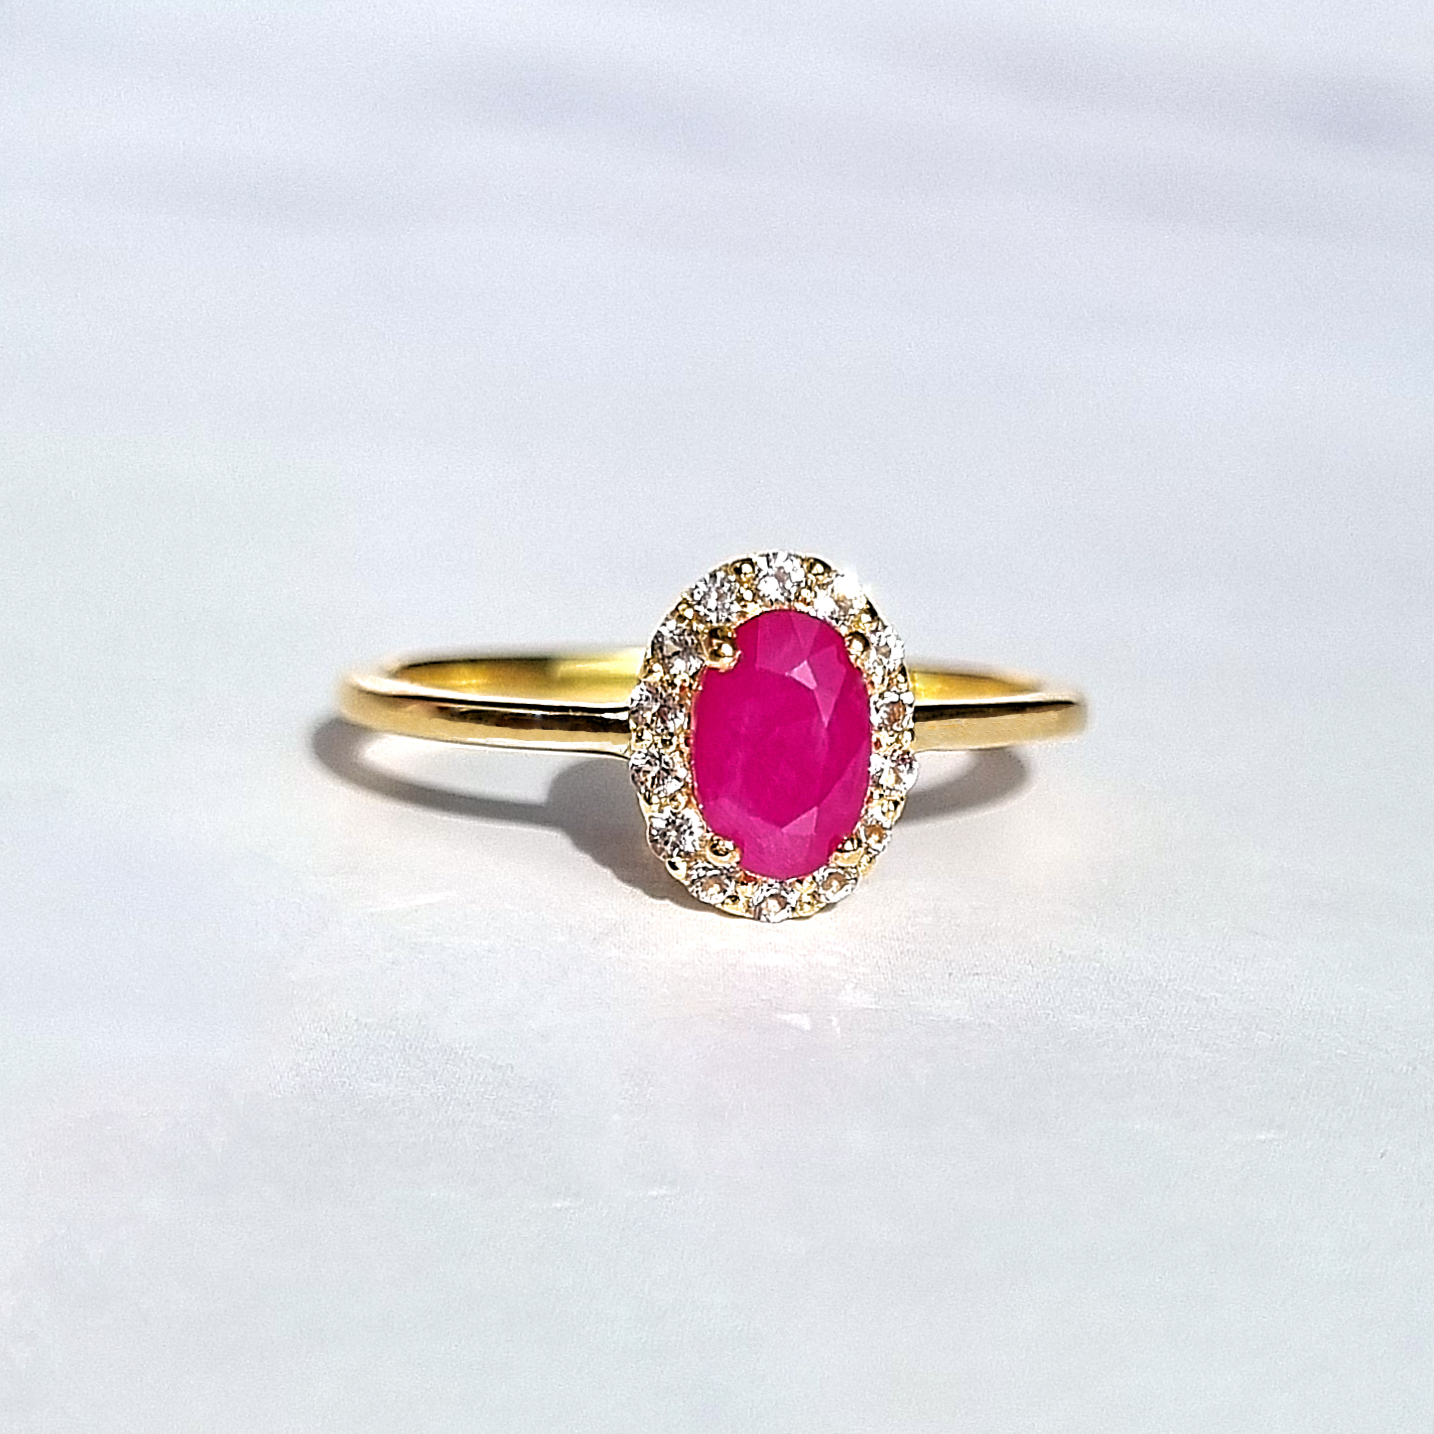  oval cut pinkish red gemstone and white topaz engagement , promise and wedding ring in 18k gold vermeil